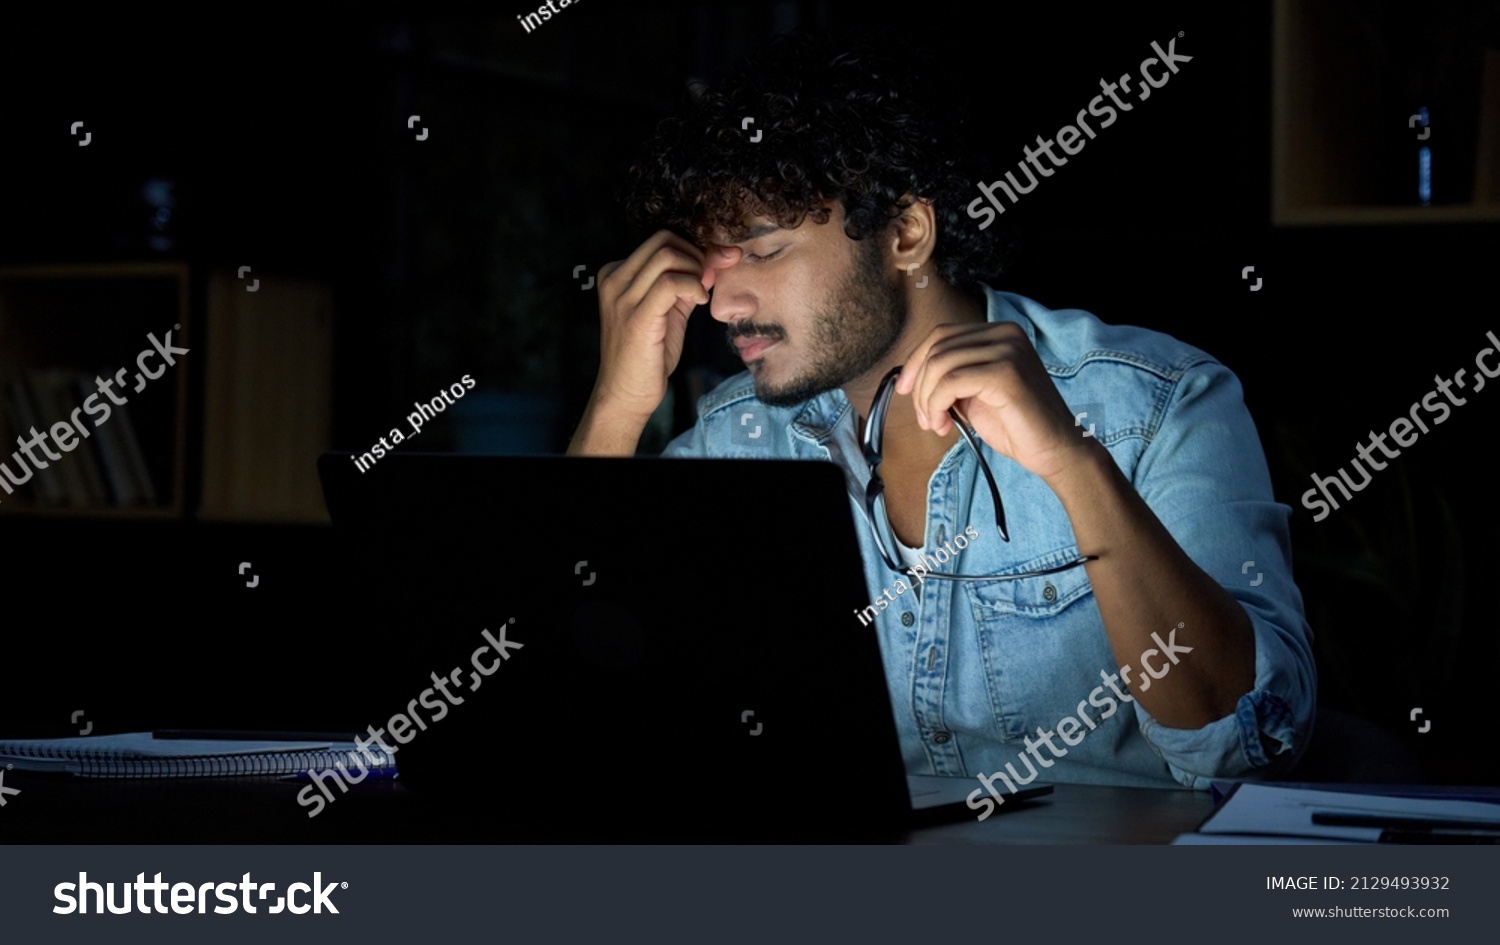 Overworked young indian businessman taking off glasses working late at night. Tired sleepy stressed student holding eyeglasses feeling lack of sleep, having eyestrain problem, using laptop computer. #2129493932